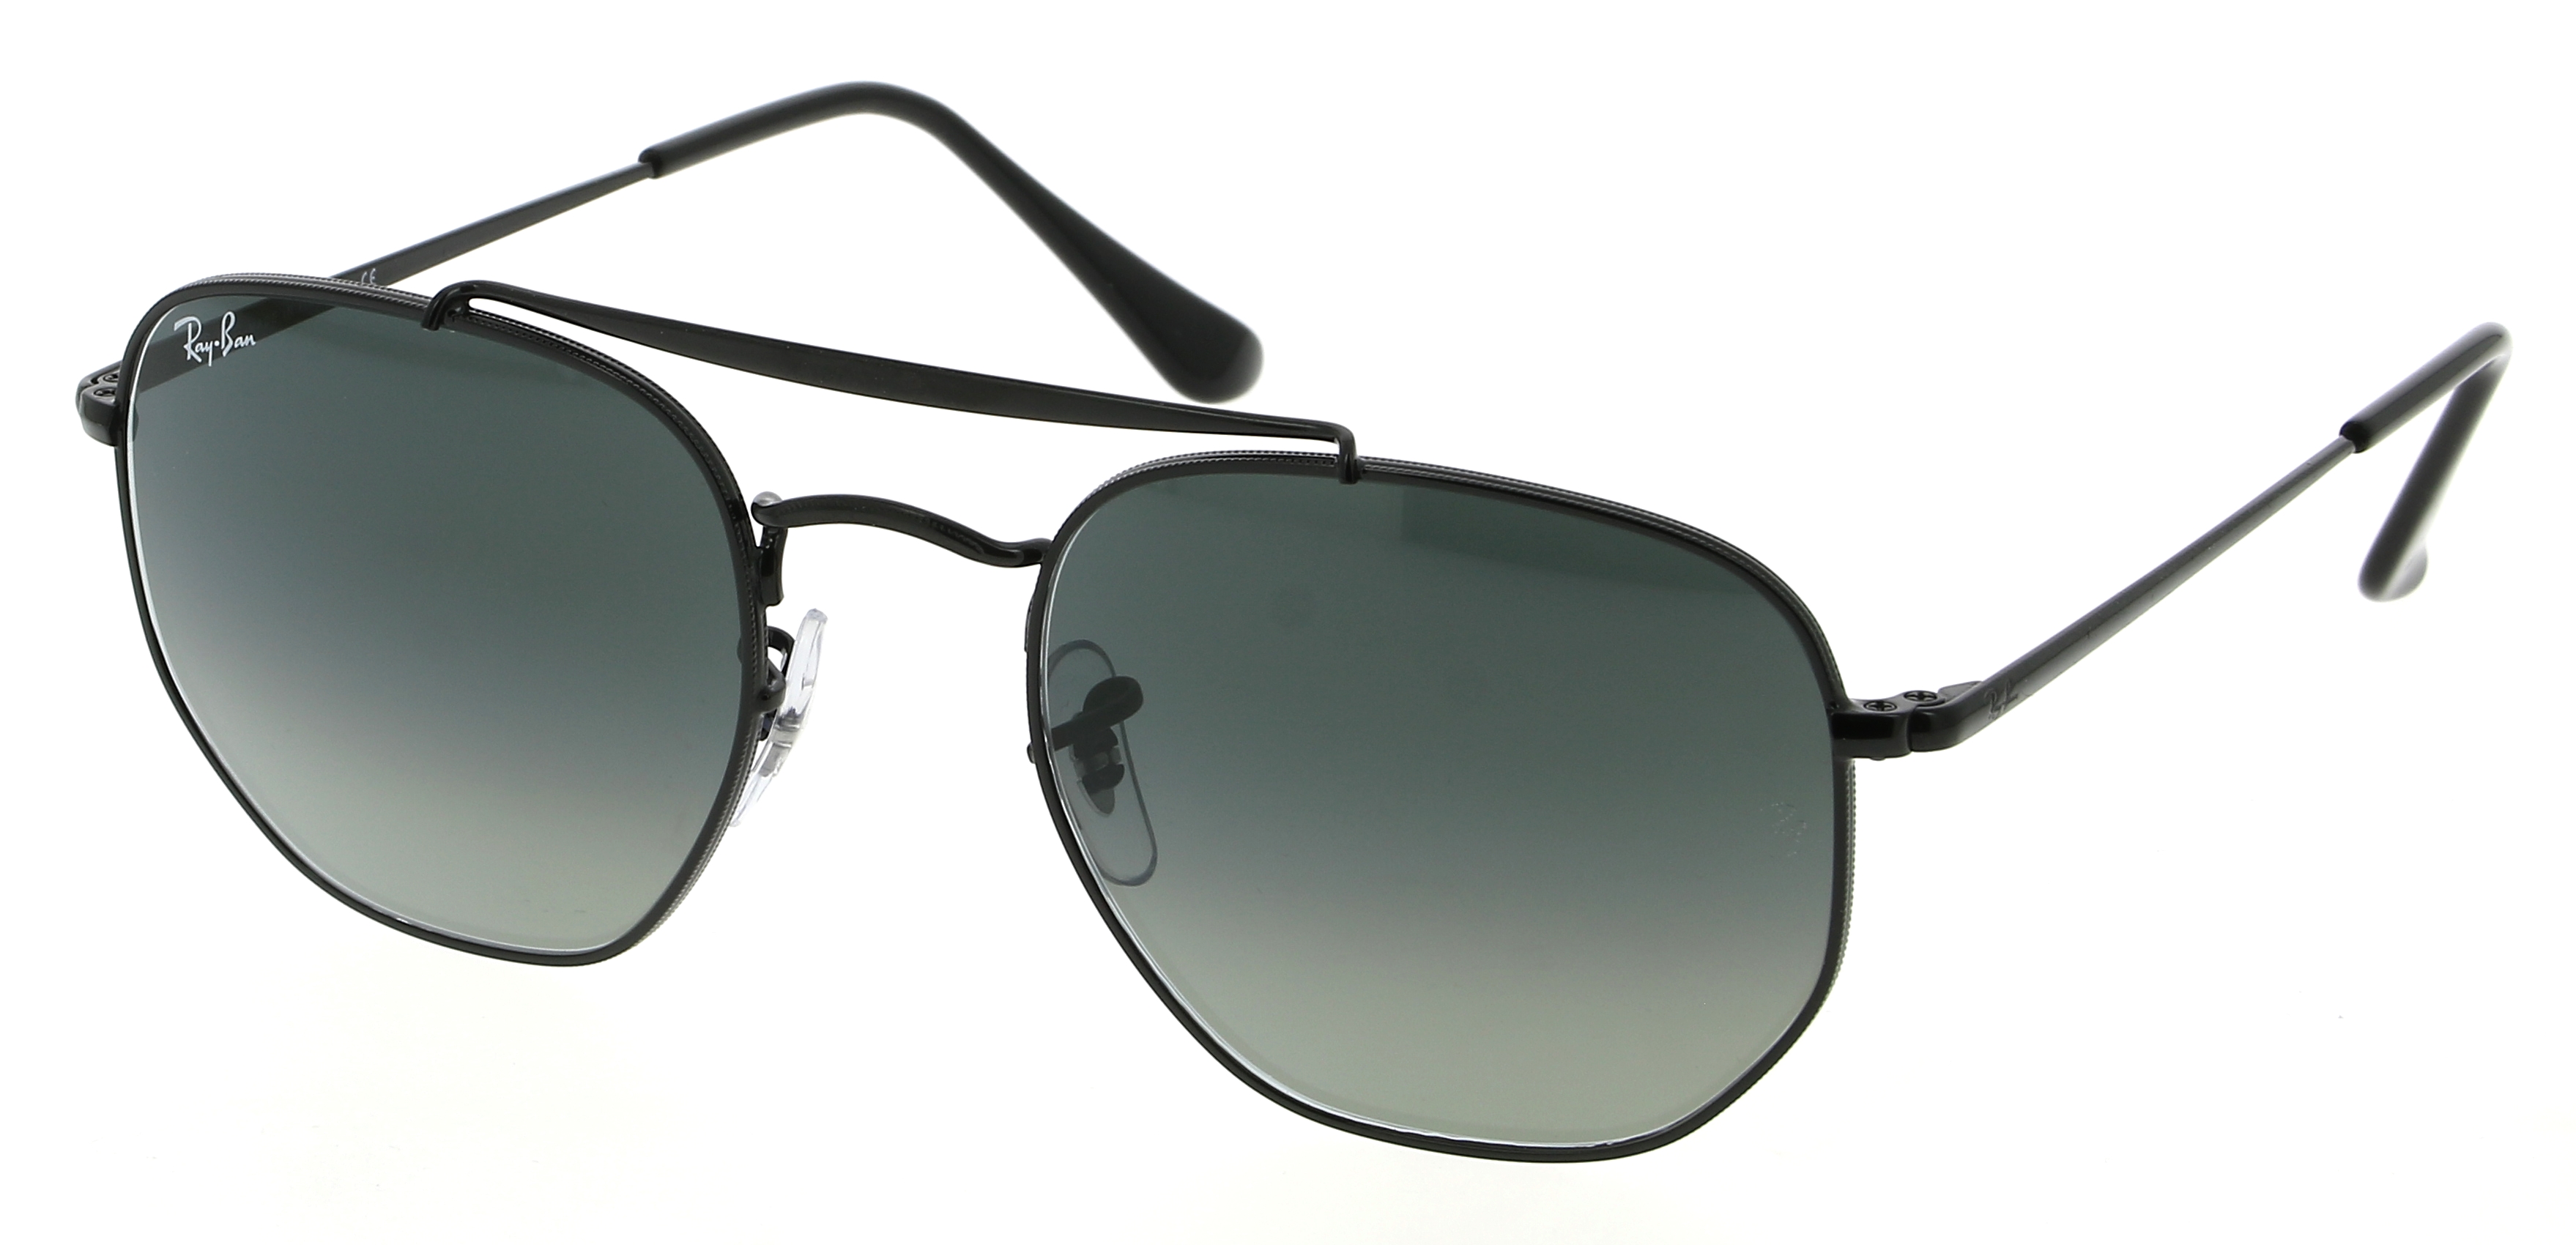 Lunettes de soleil RAY-BAN RB 3648 002/71 THE MARSHAL 51/21